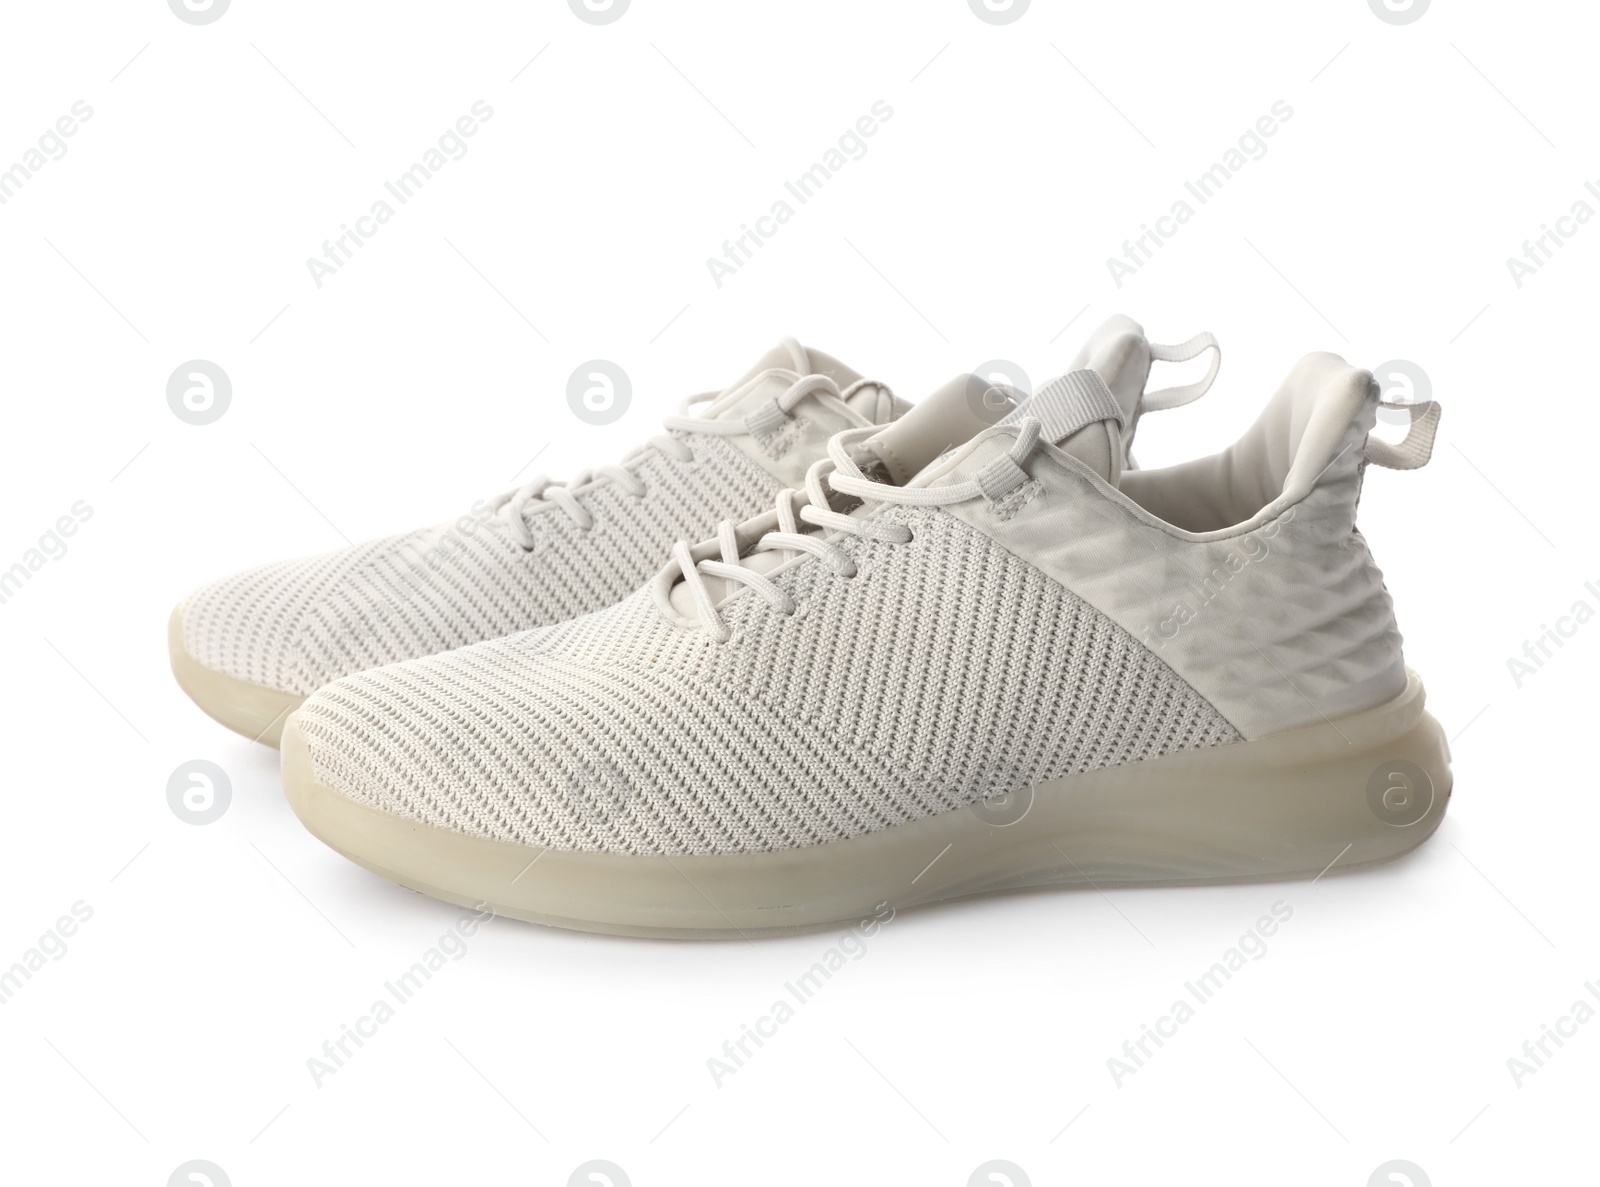 Photo of Pair of stylish sneakers on white background